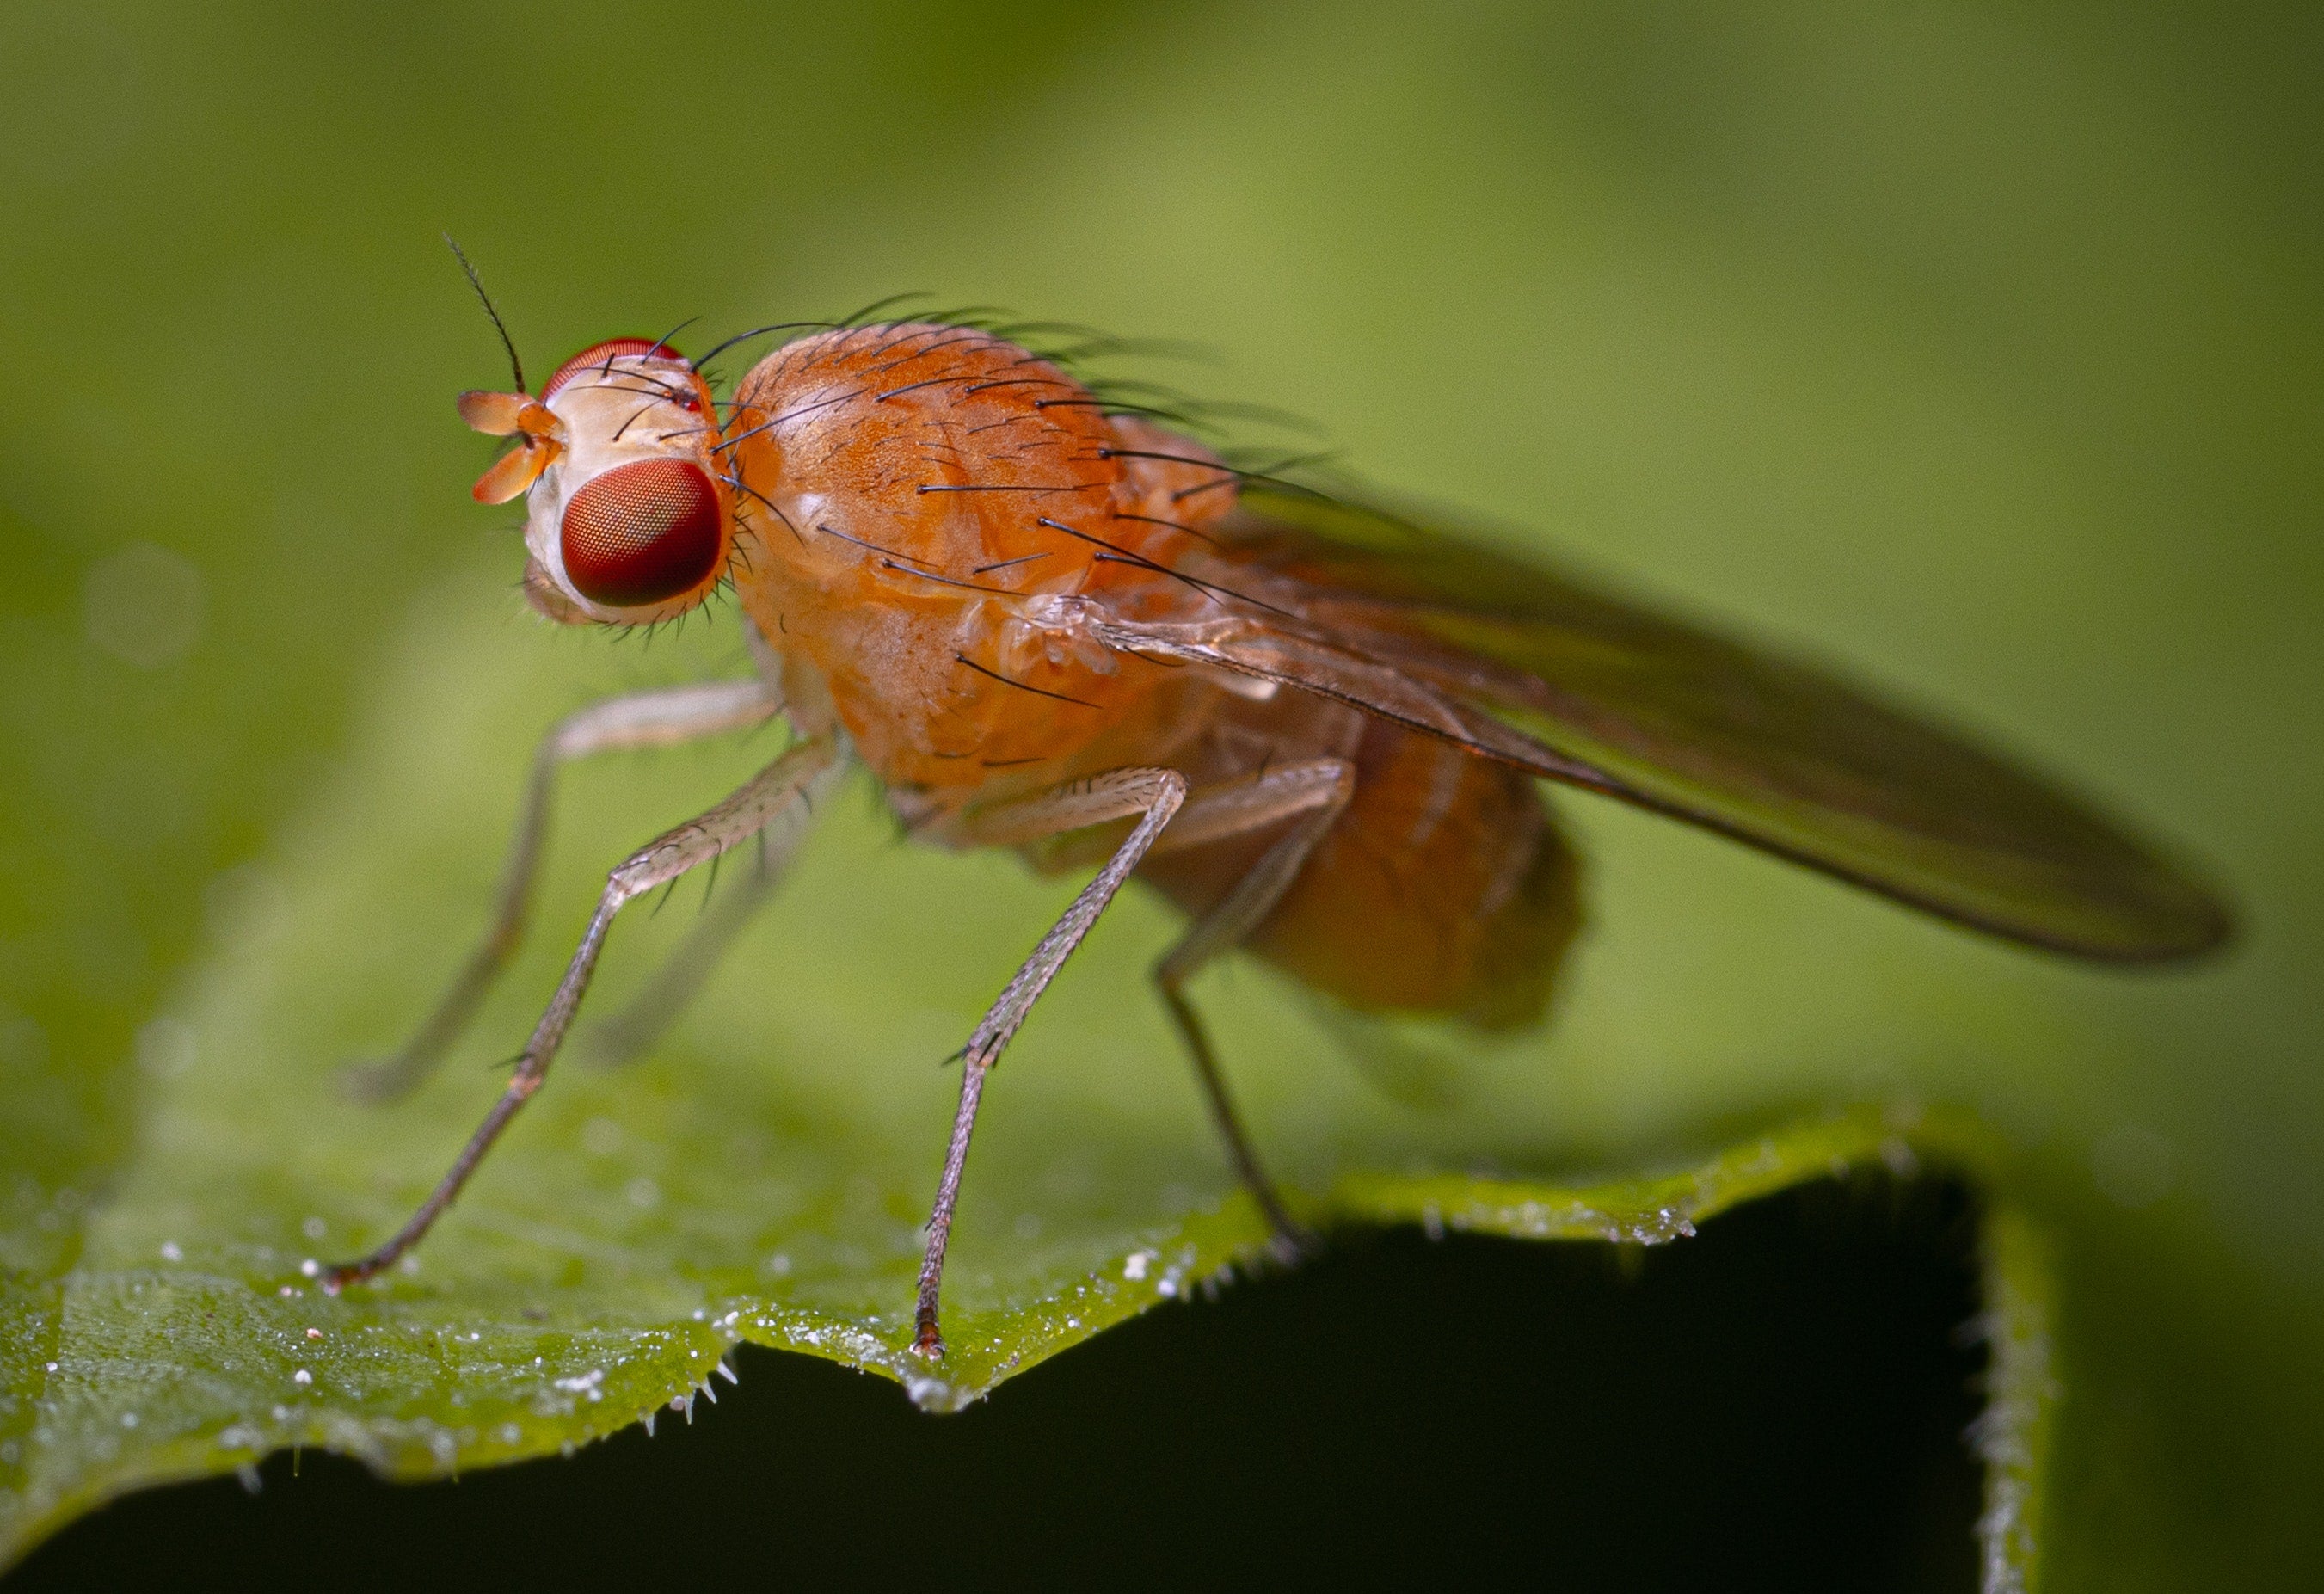 10 Best Traps That Actually Get Rid Of Fruit Flies